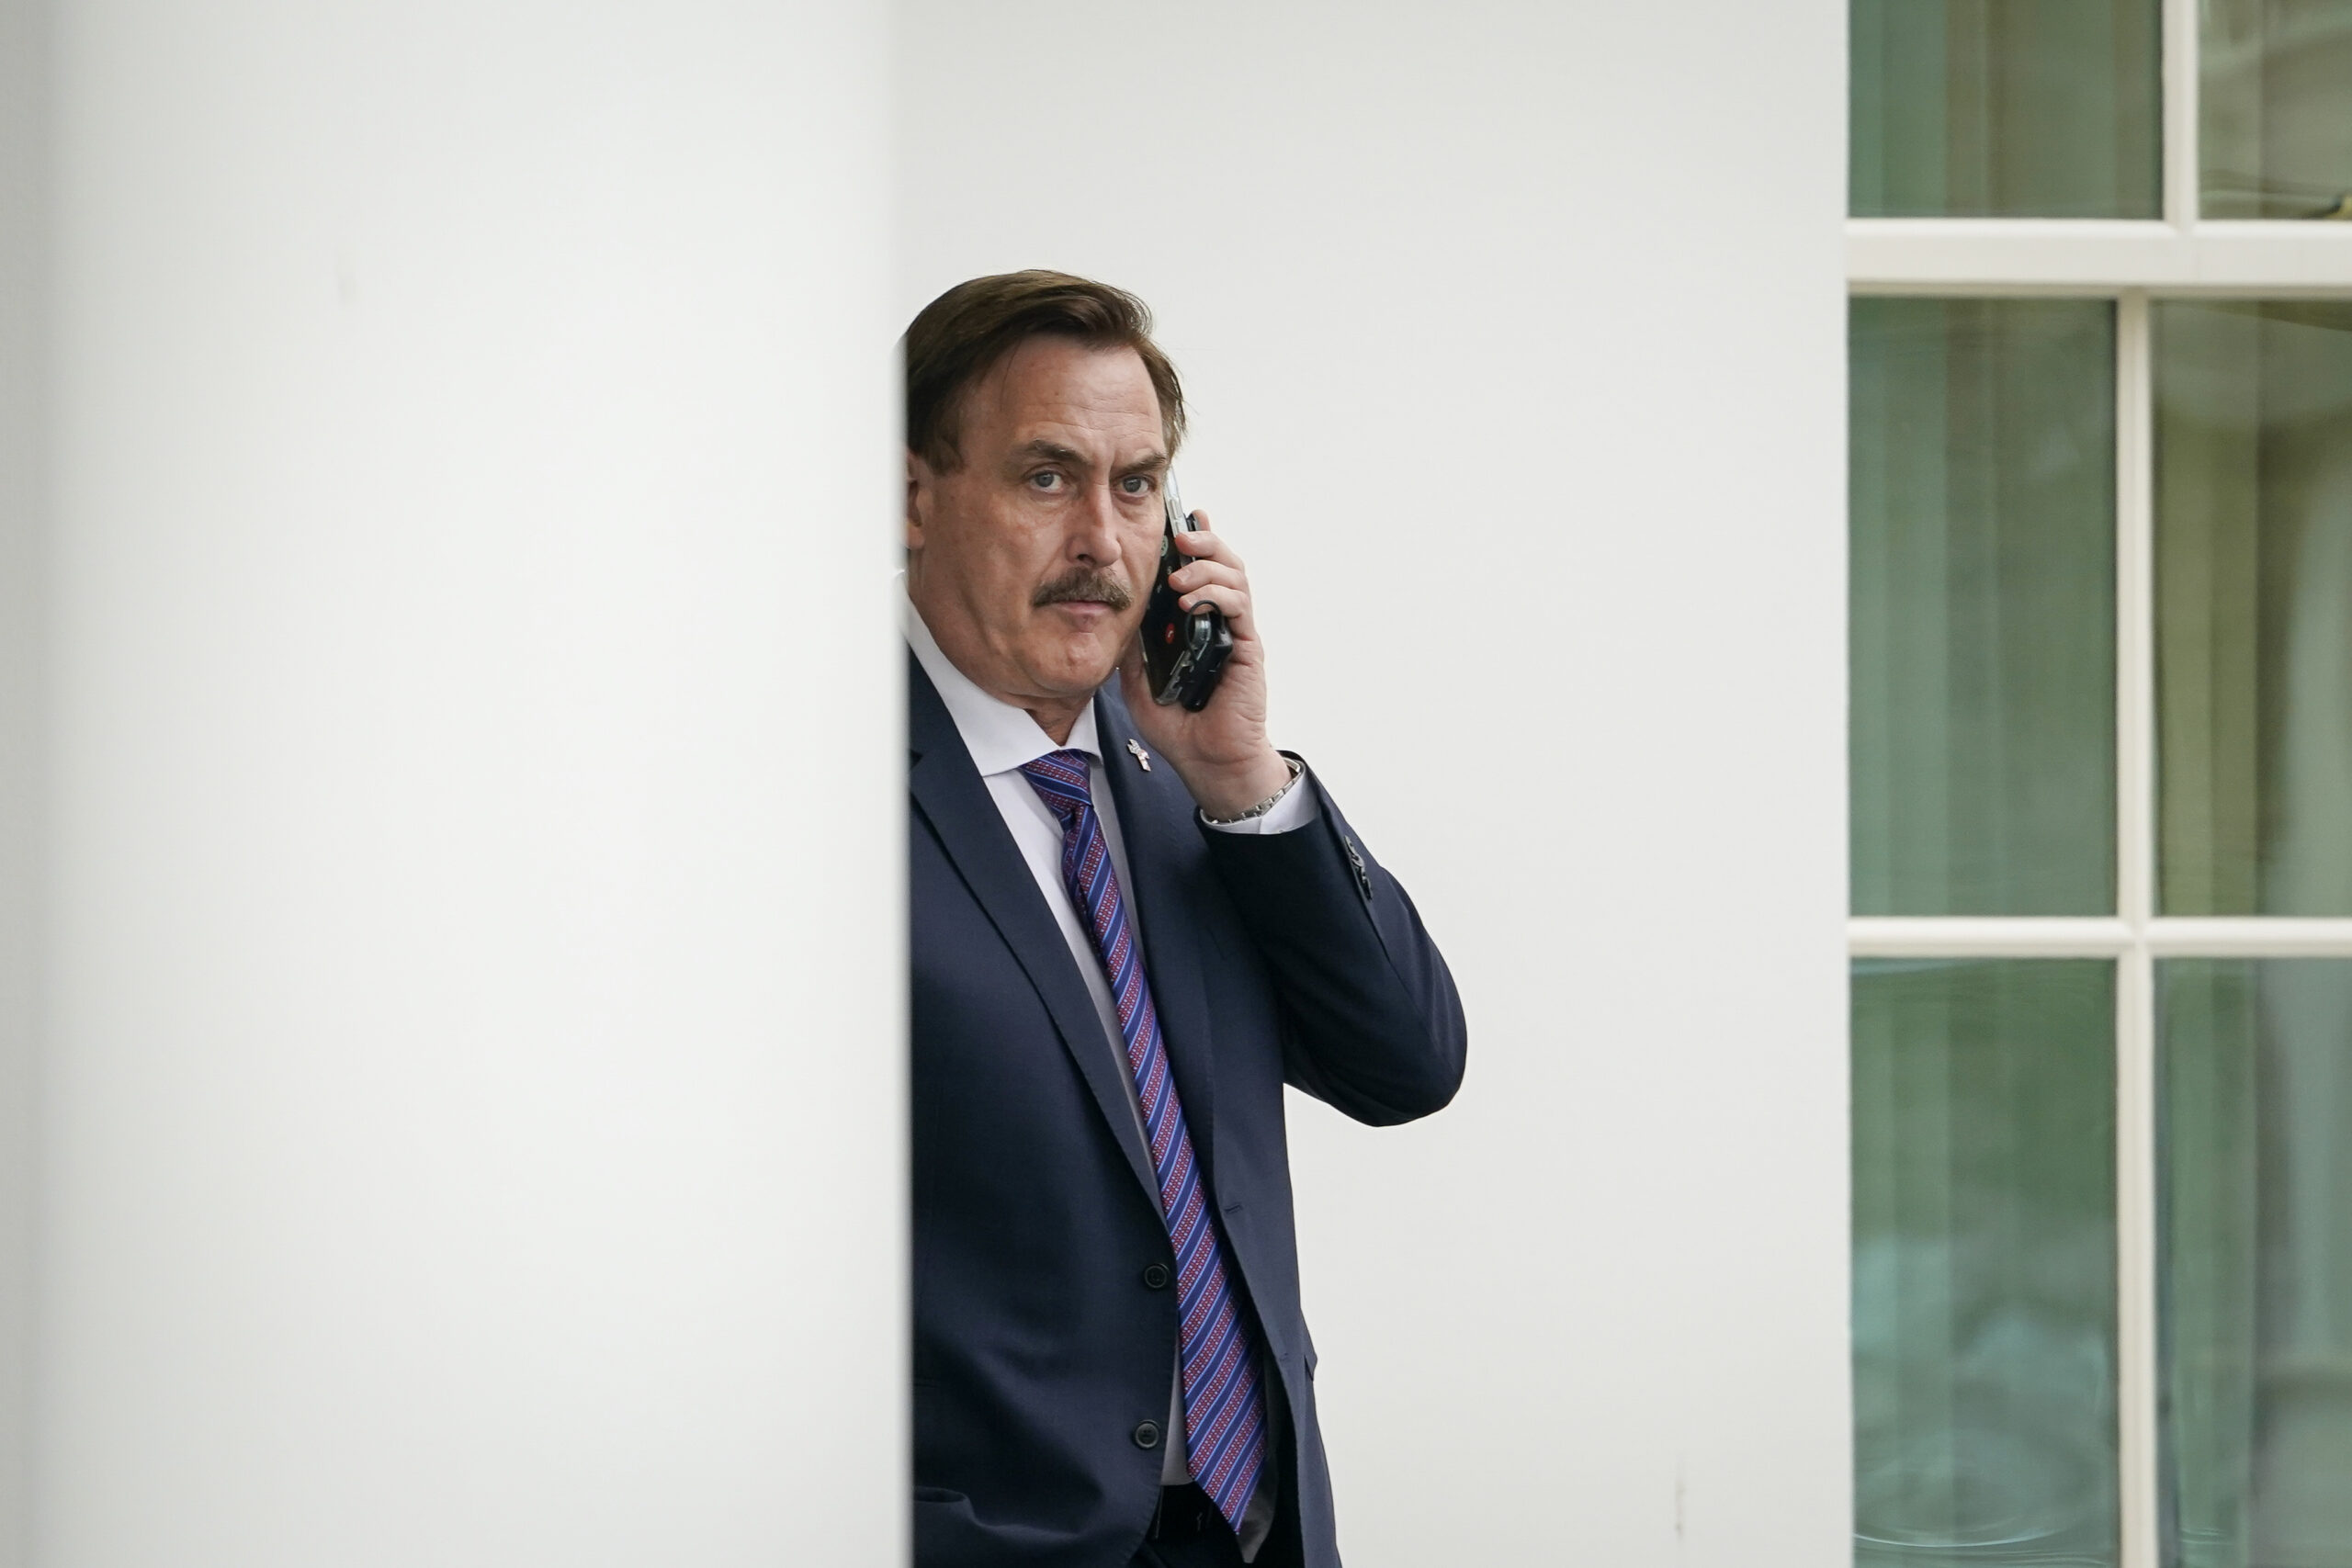 Mike Lindell Slams Fox News, Suggests Hacking Hannity to Air 2020 Election Fraud Allegations